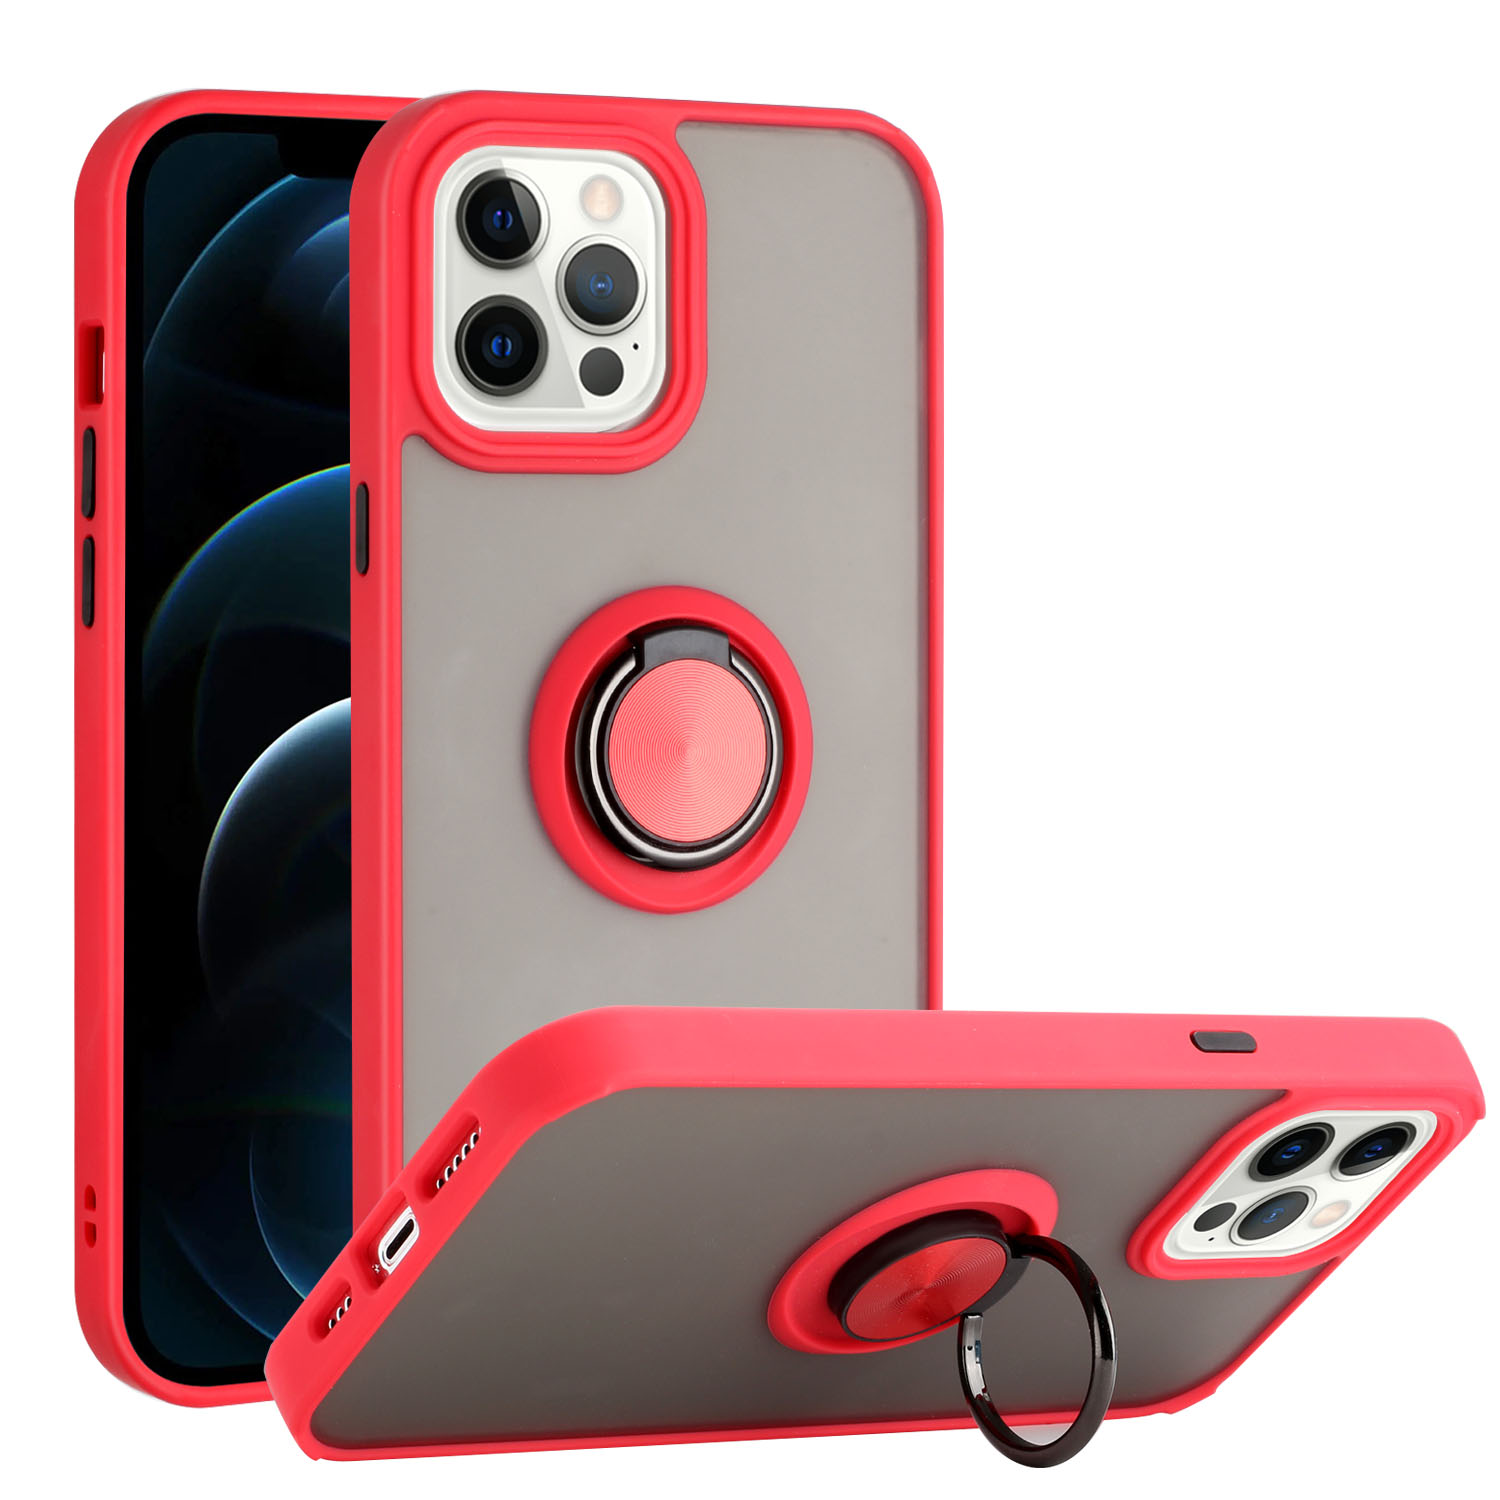 Tuff Slim Armor Hybrid RING Stand Case for Apple iPhone 13 Pro Max [6.7] (Red)